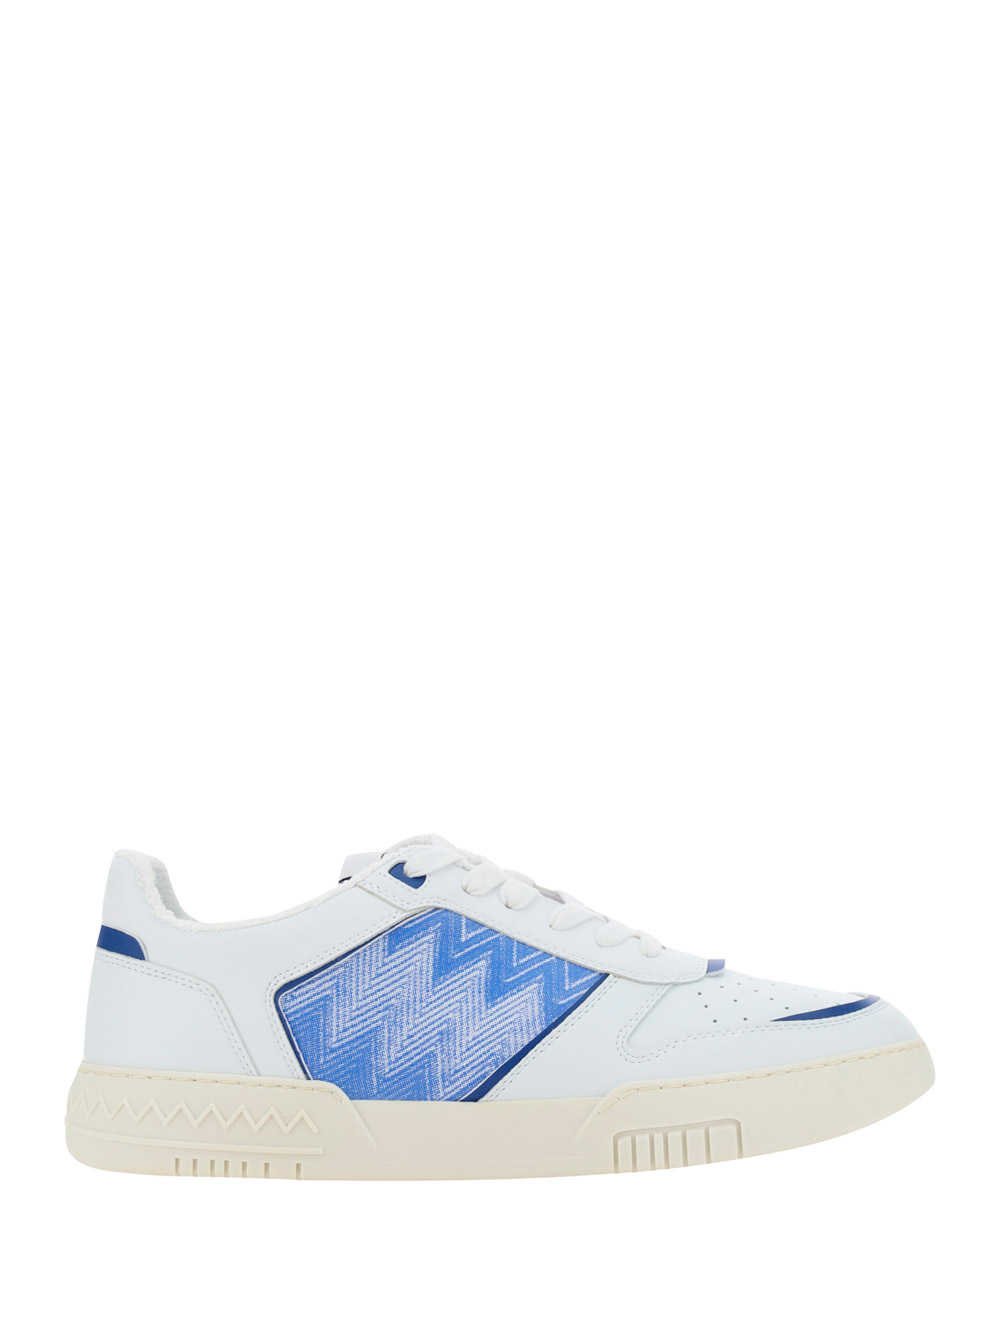 Acbc X Missoni Sneakers In White+blue Detail